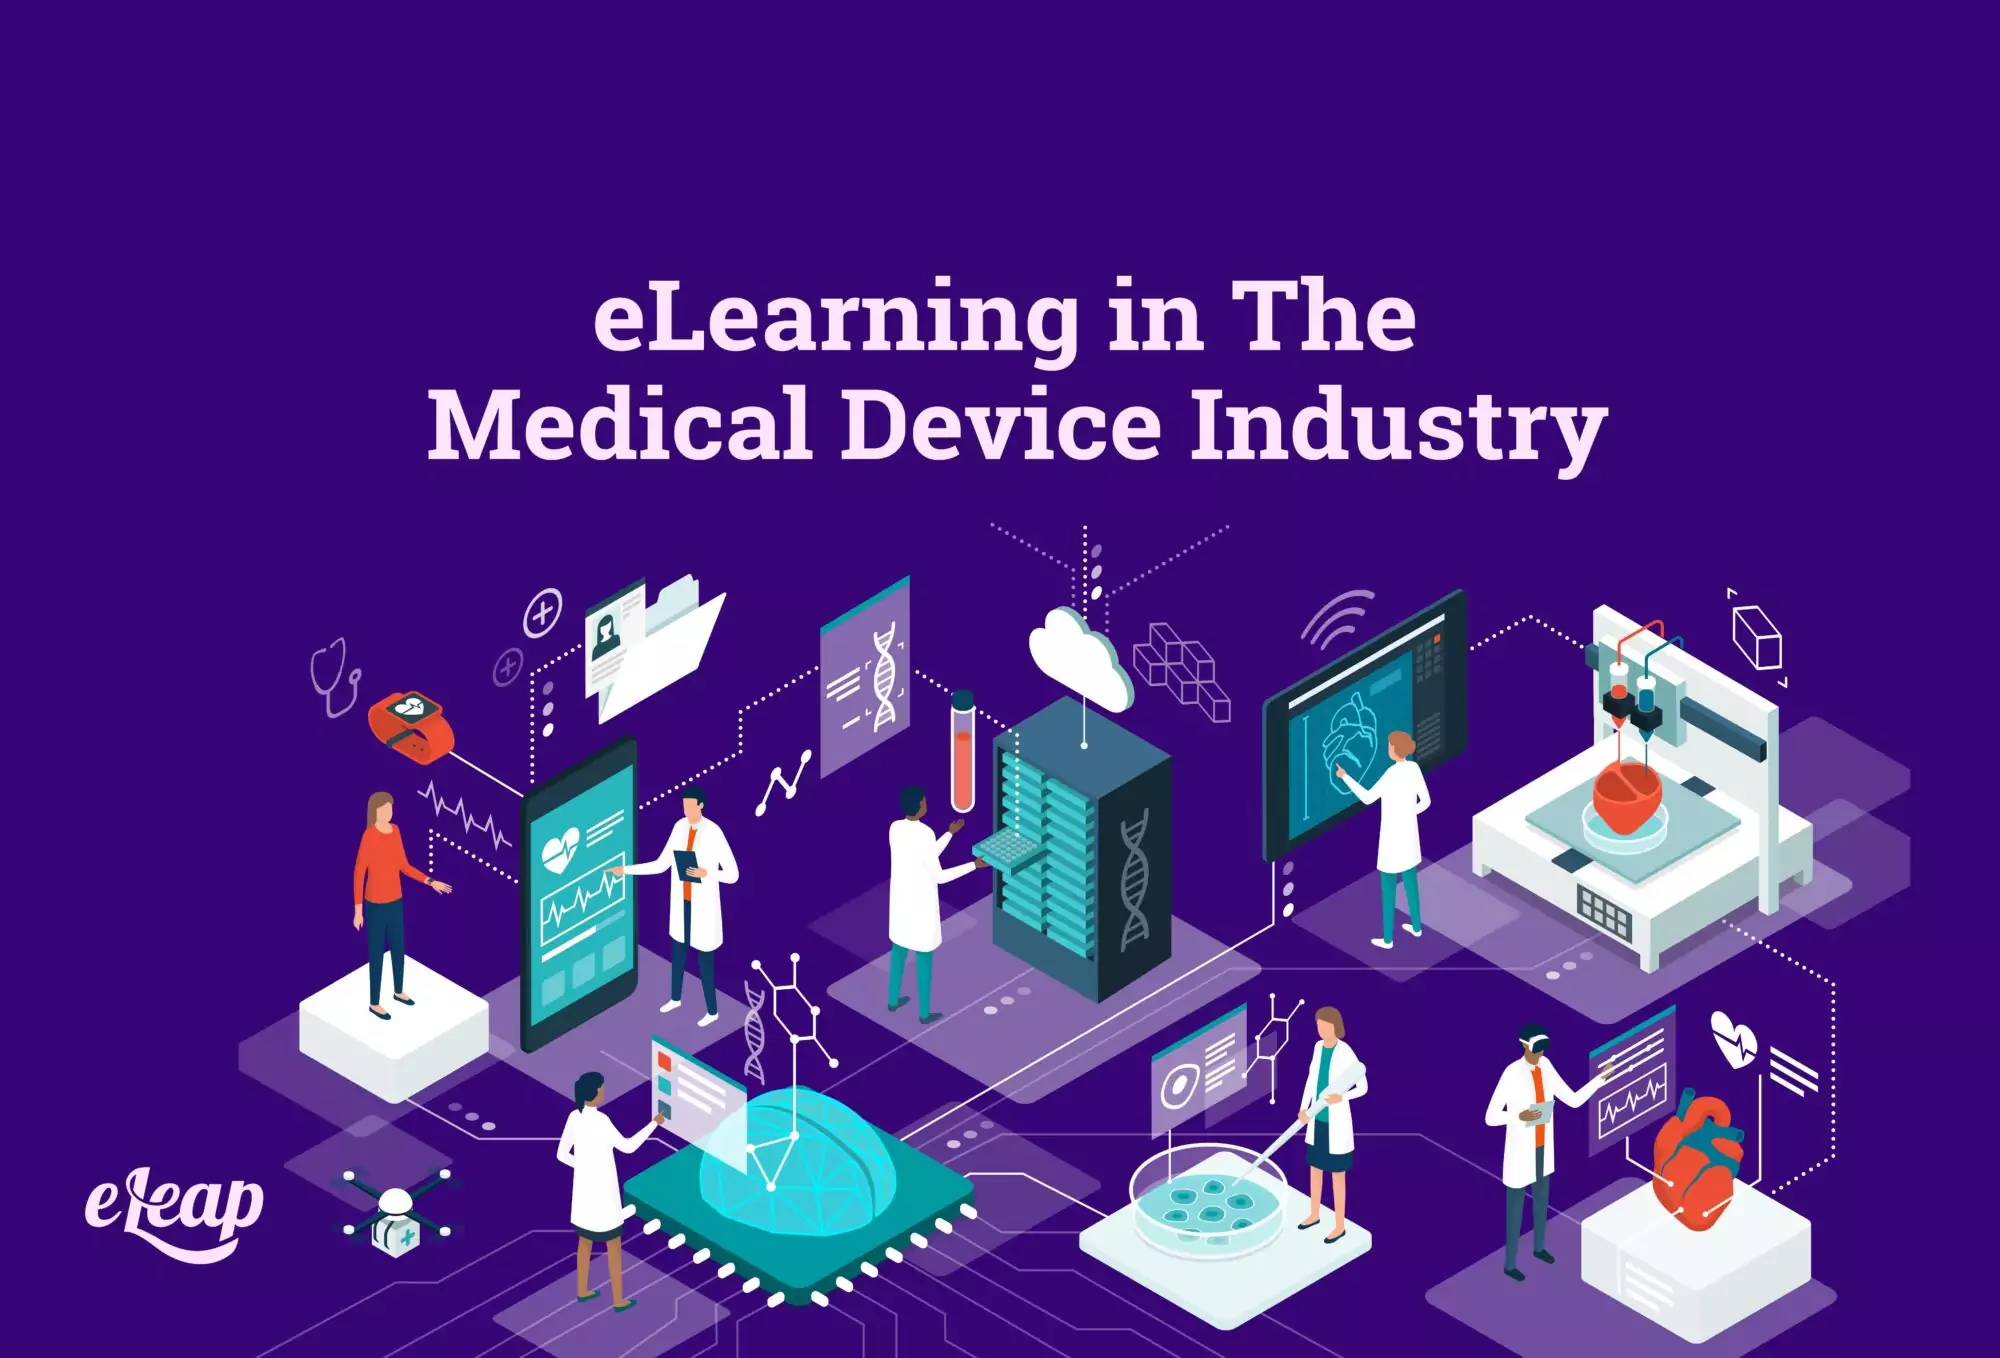 eLearning in The Medical Device Industry